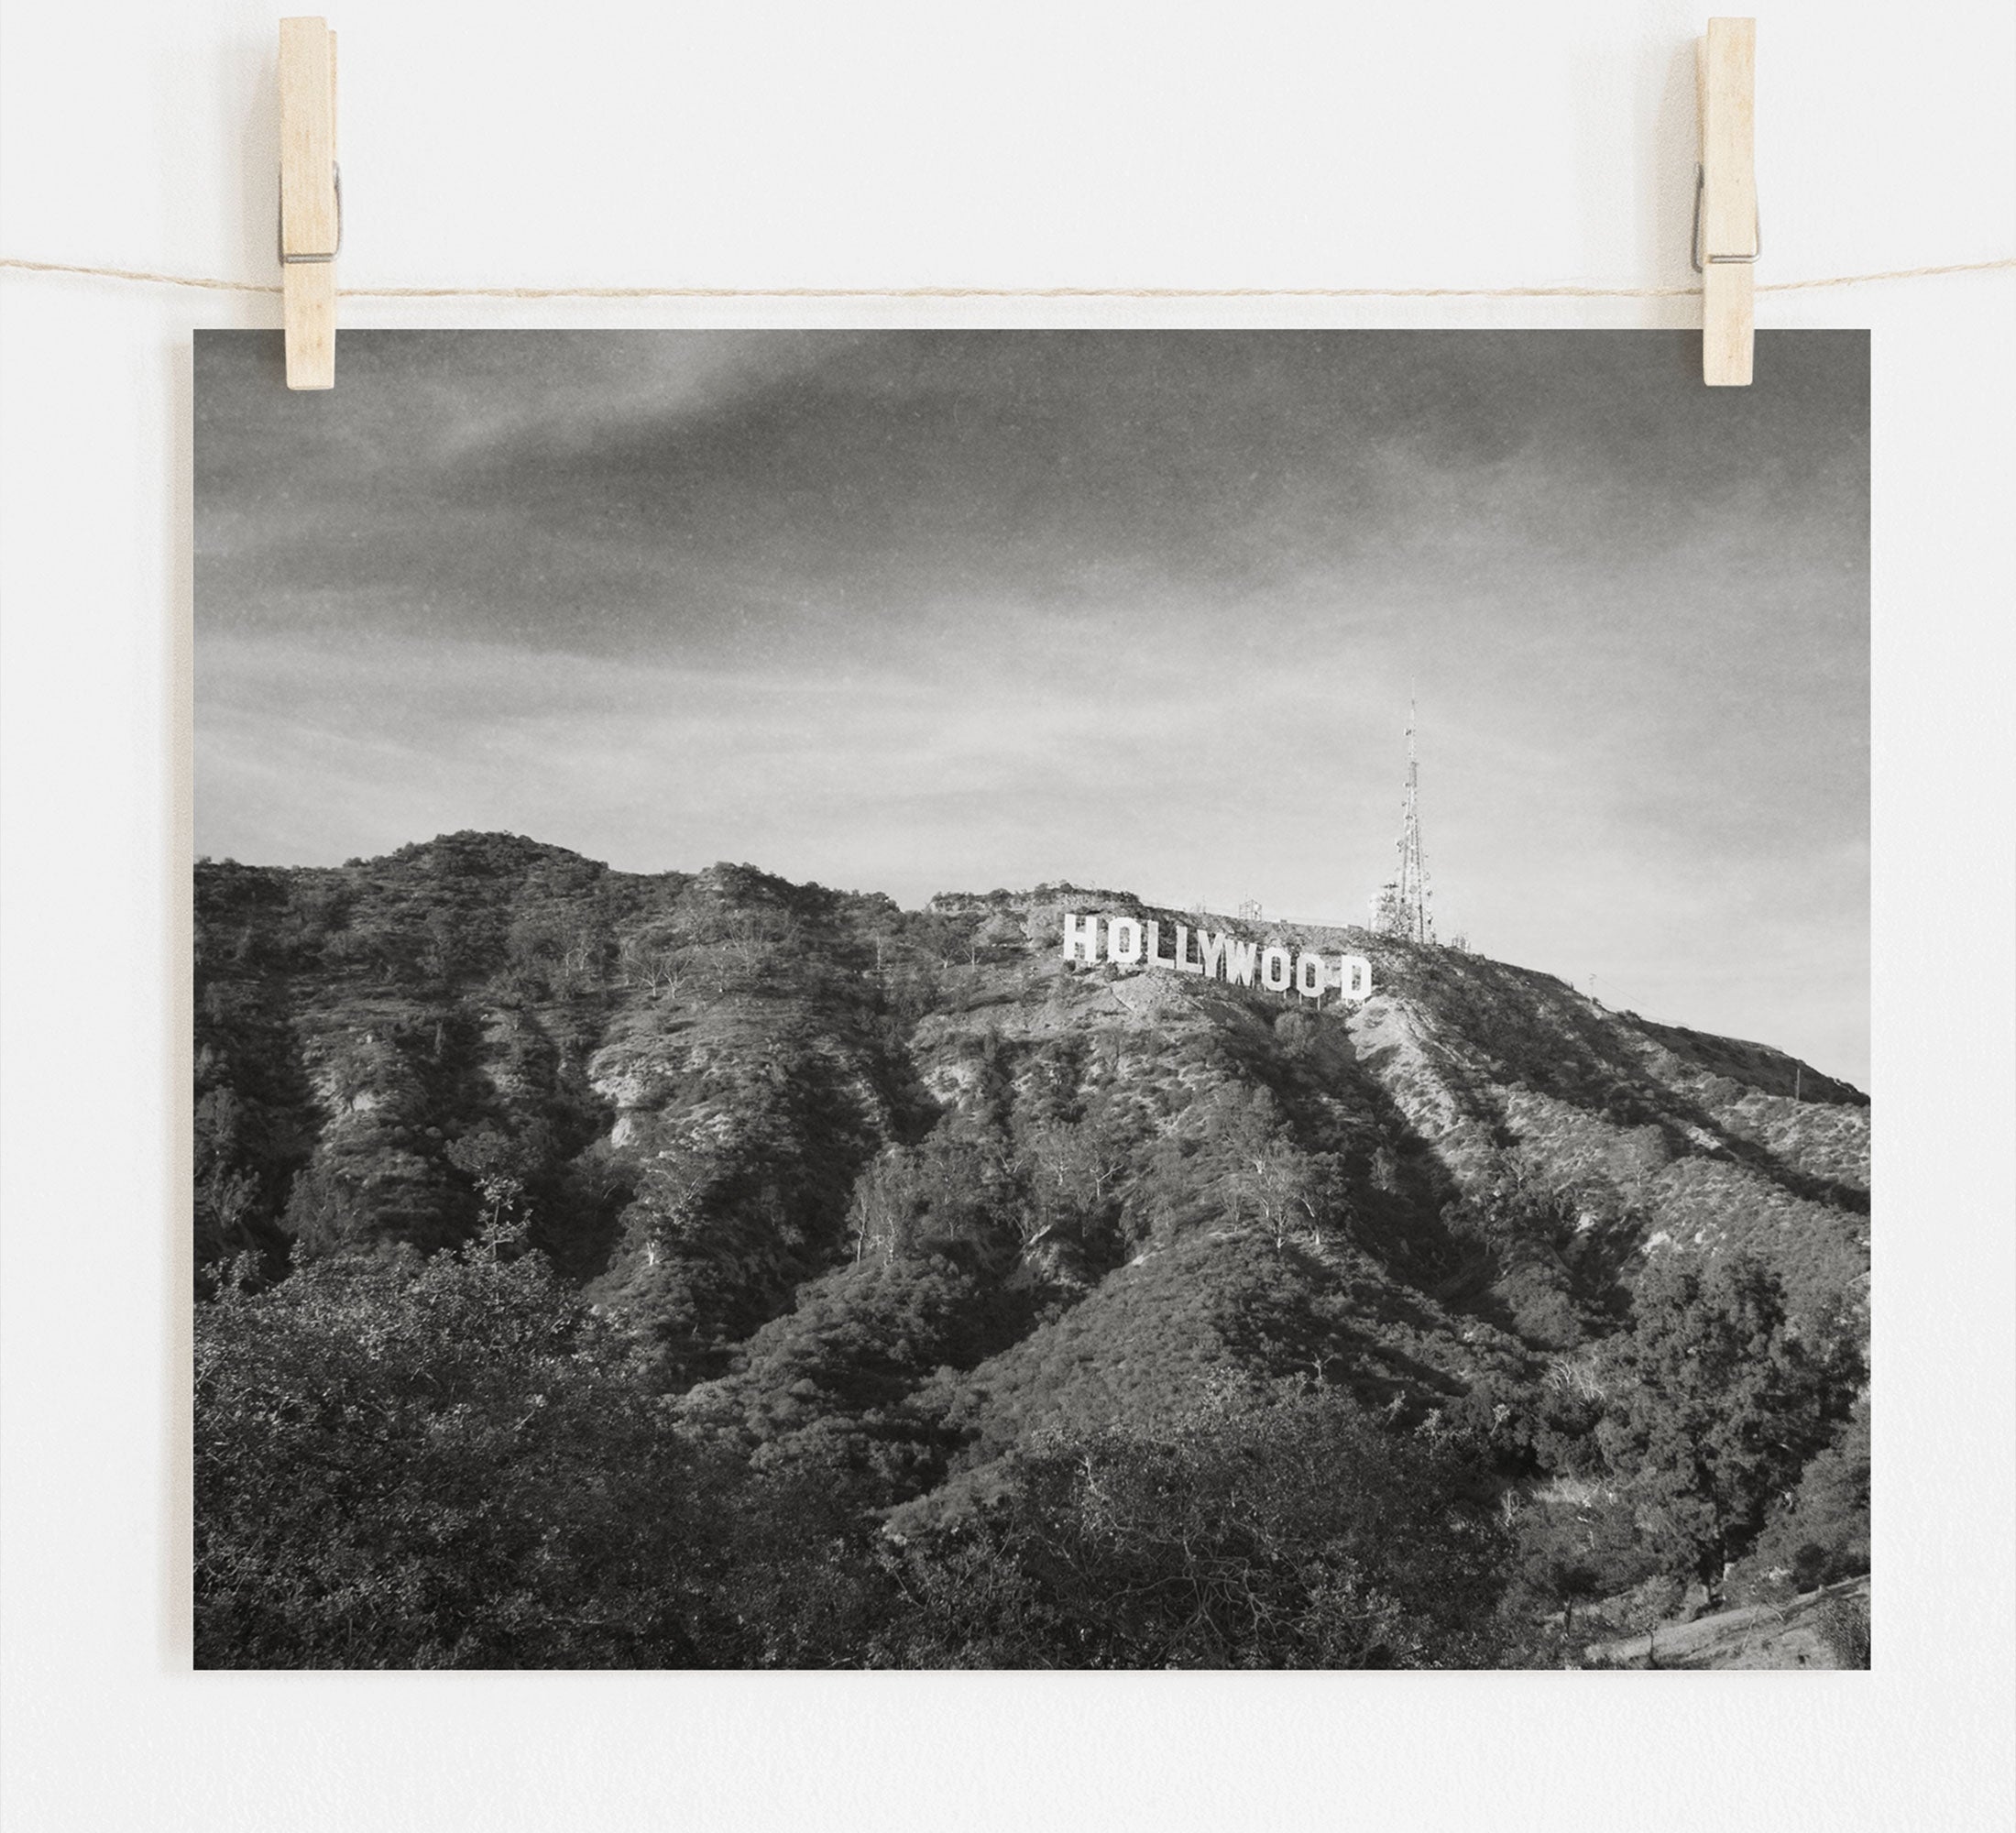 Black and white film noir photograph of the Offley Green Hollywood Sign Black and White Vintage Print, &#39;Old Hollywood&#39; pinned up, set against a backdrop of a leafy hill with broadcasting antennas. The image has a rustic and vintage feel.